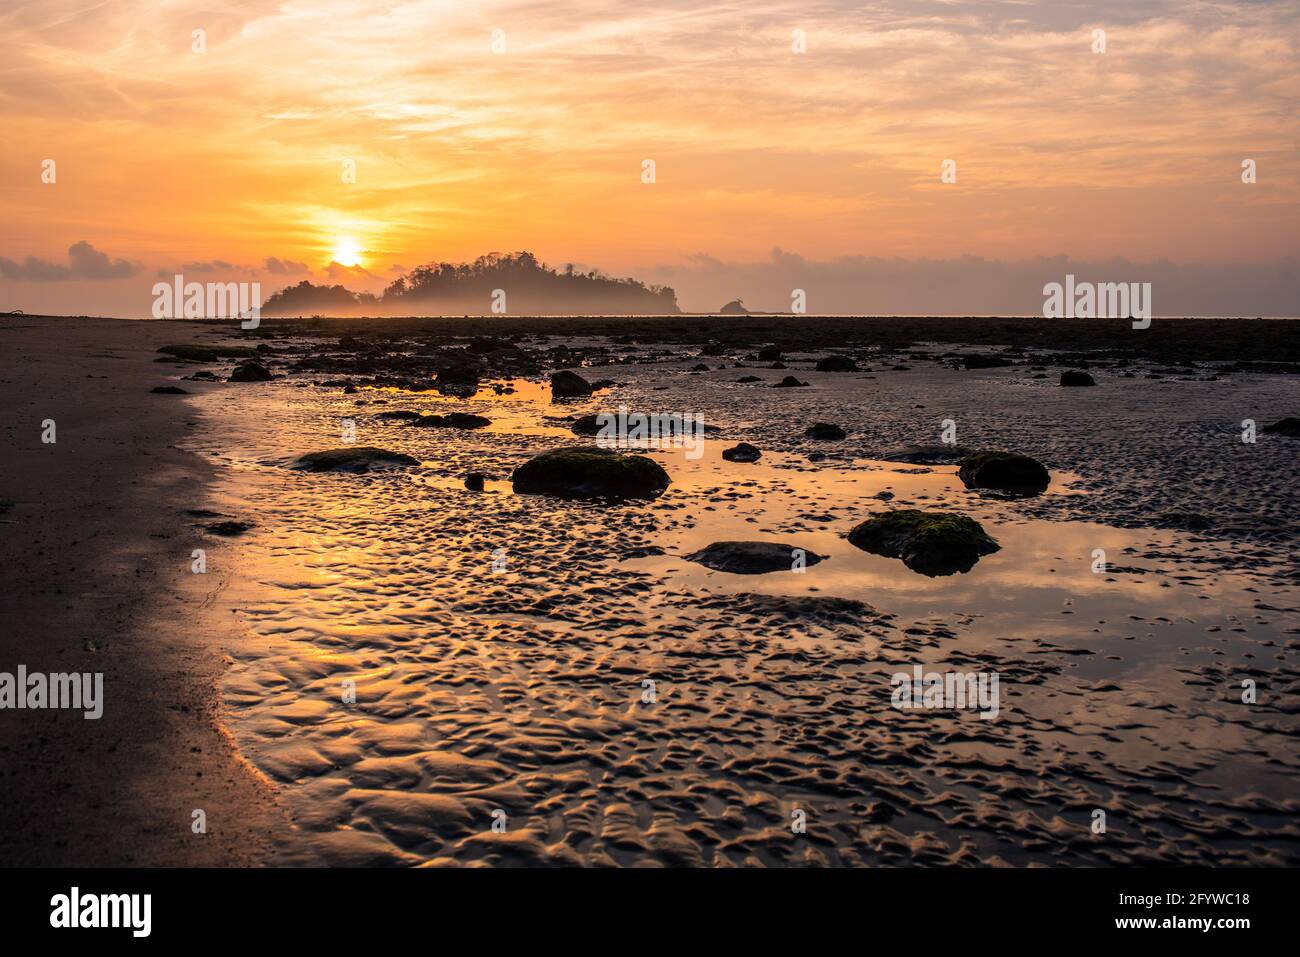 A view of Craggy island from Kalipur beach, North Andaman at sunrise Stock Photo